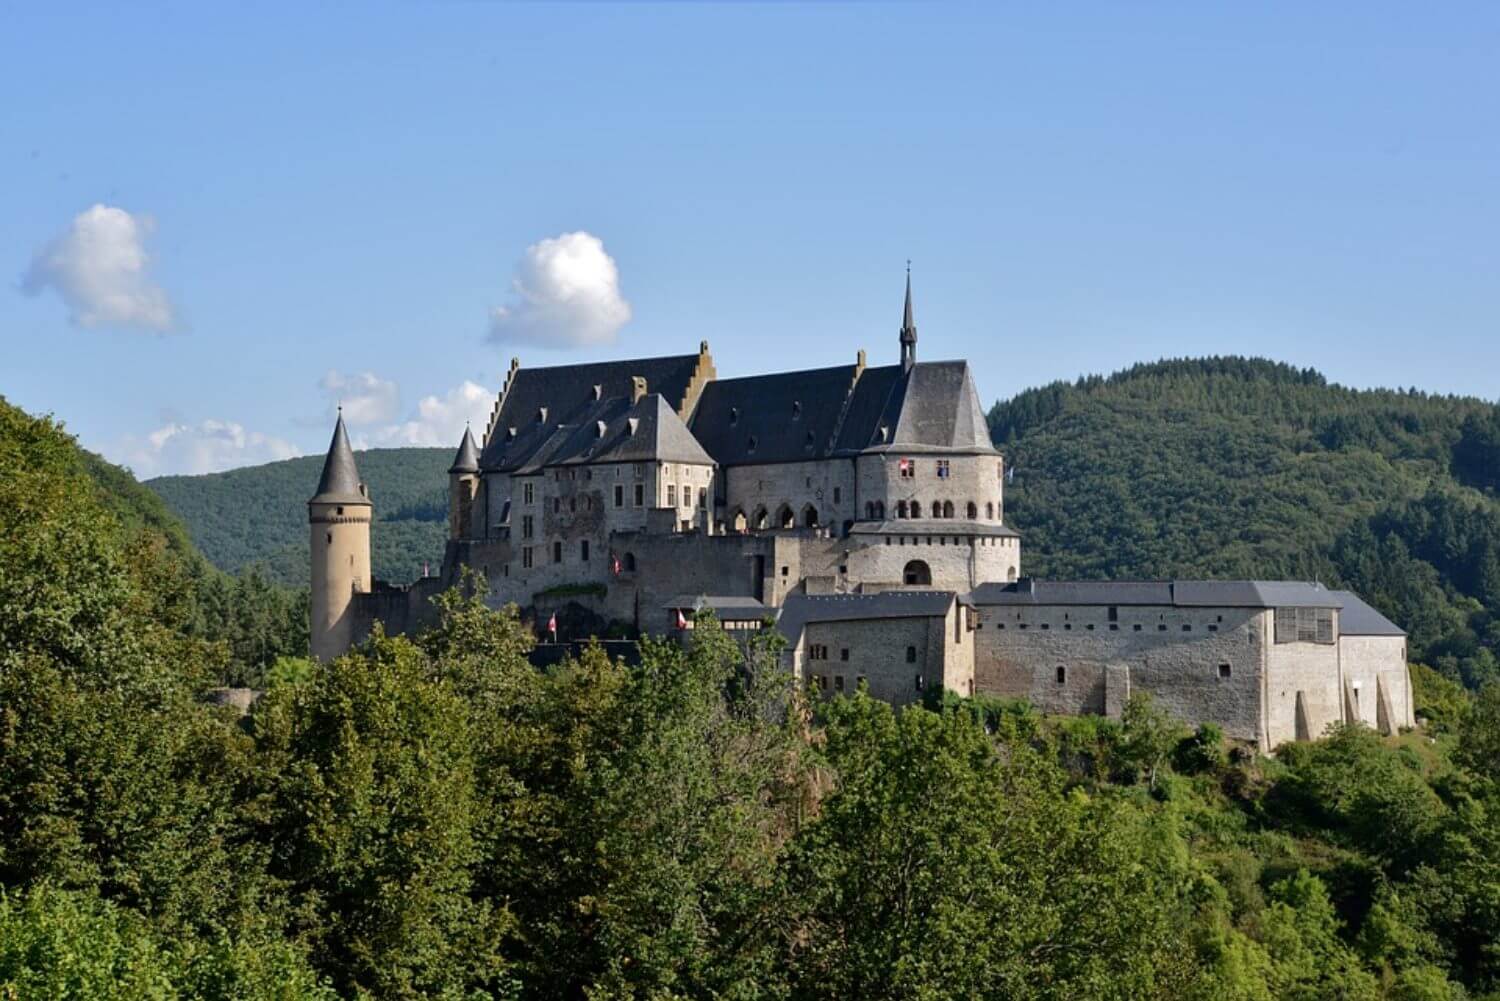 Vianden Castle - Image by YvonneHuijbens from Pixabay